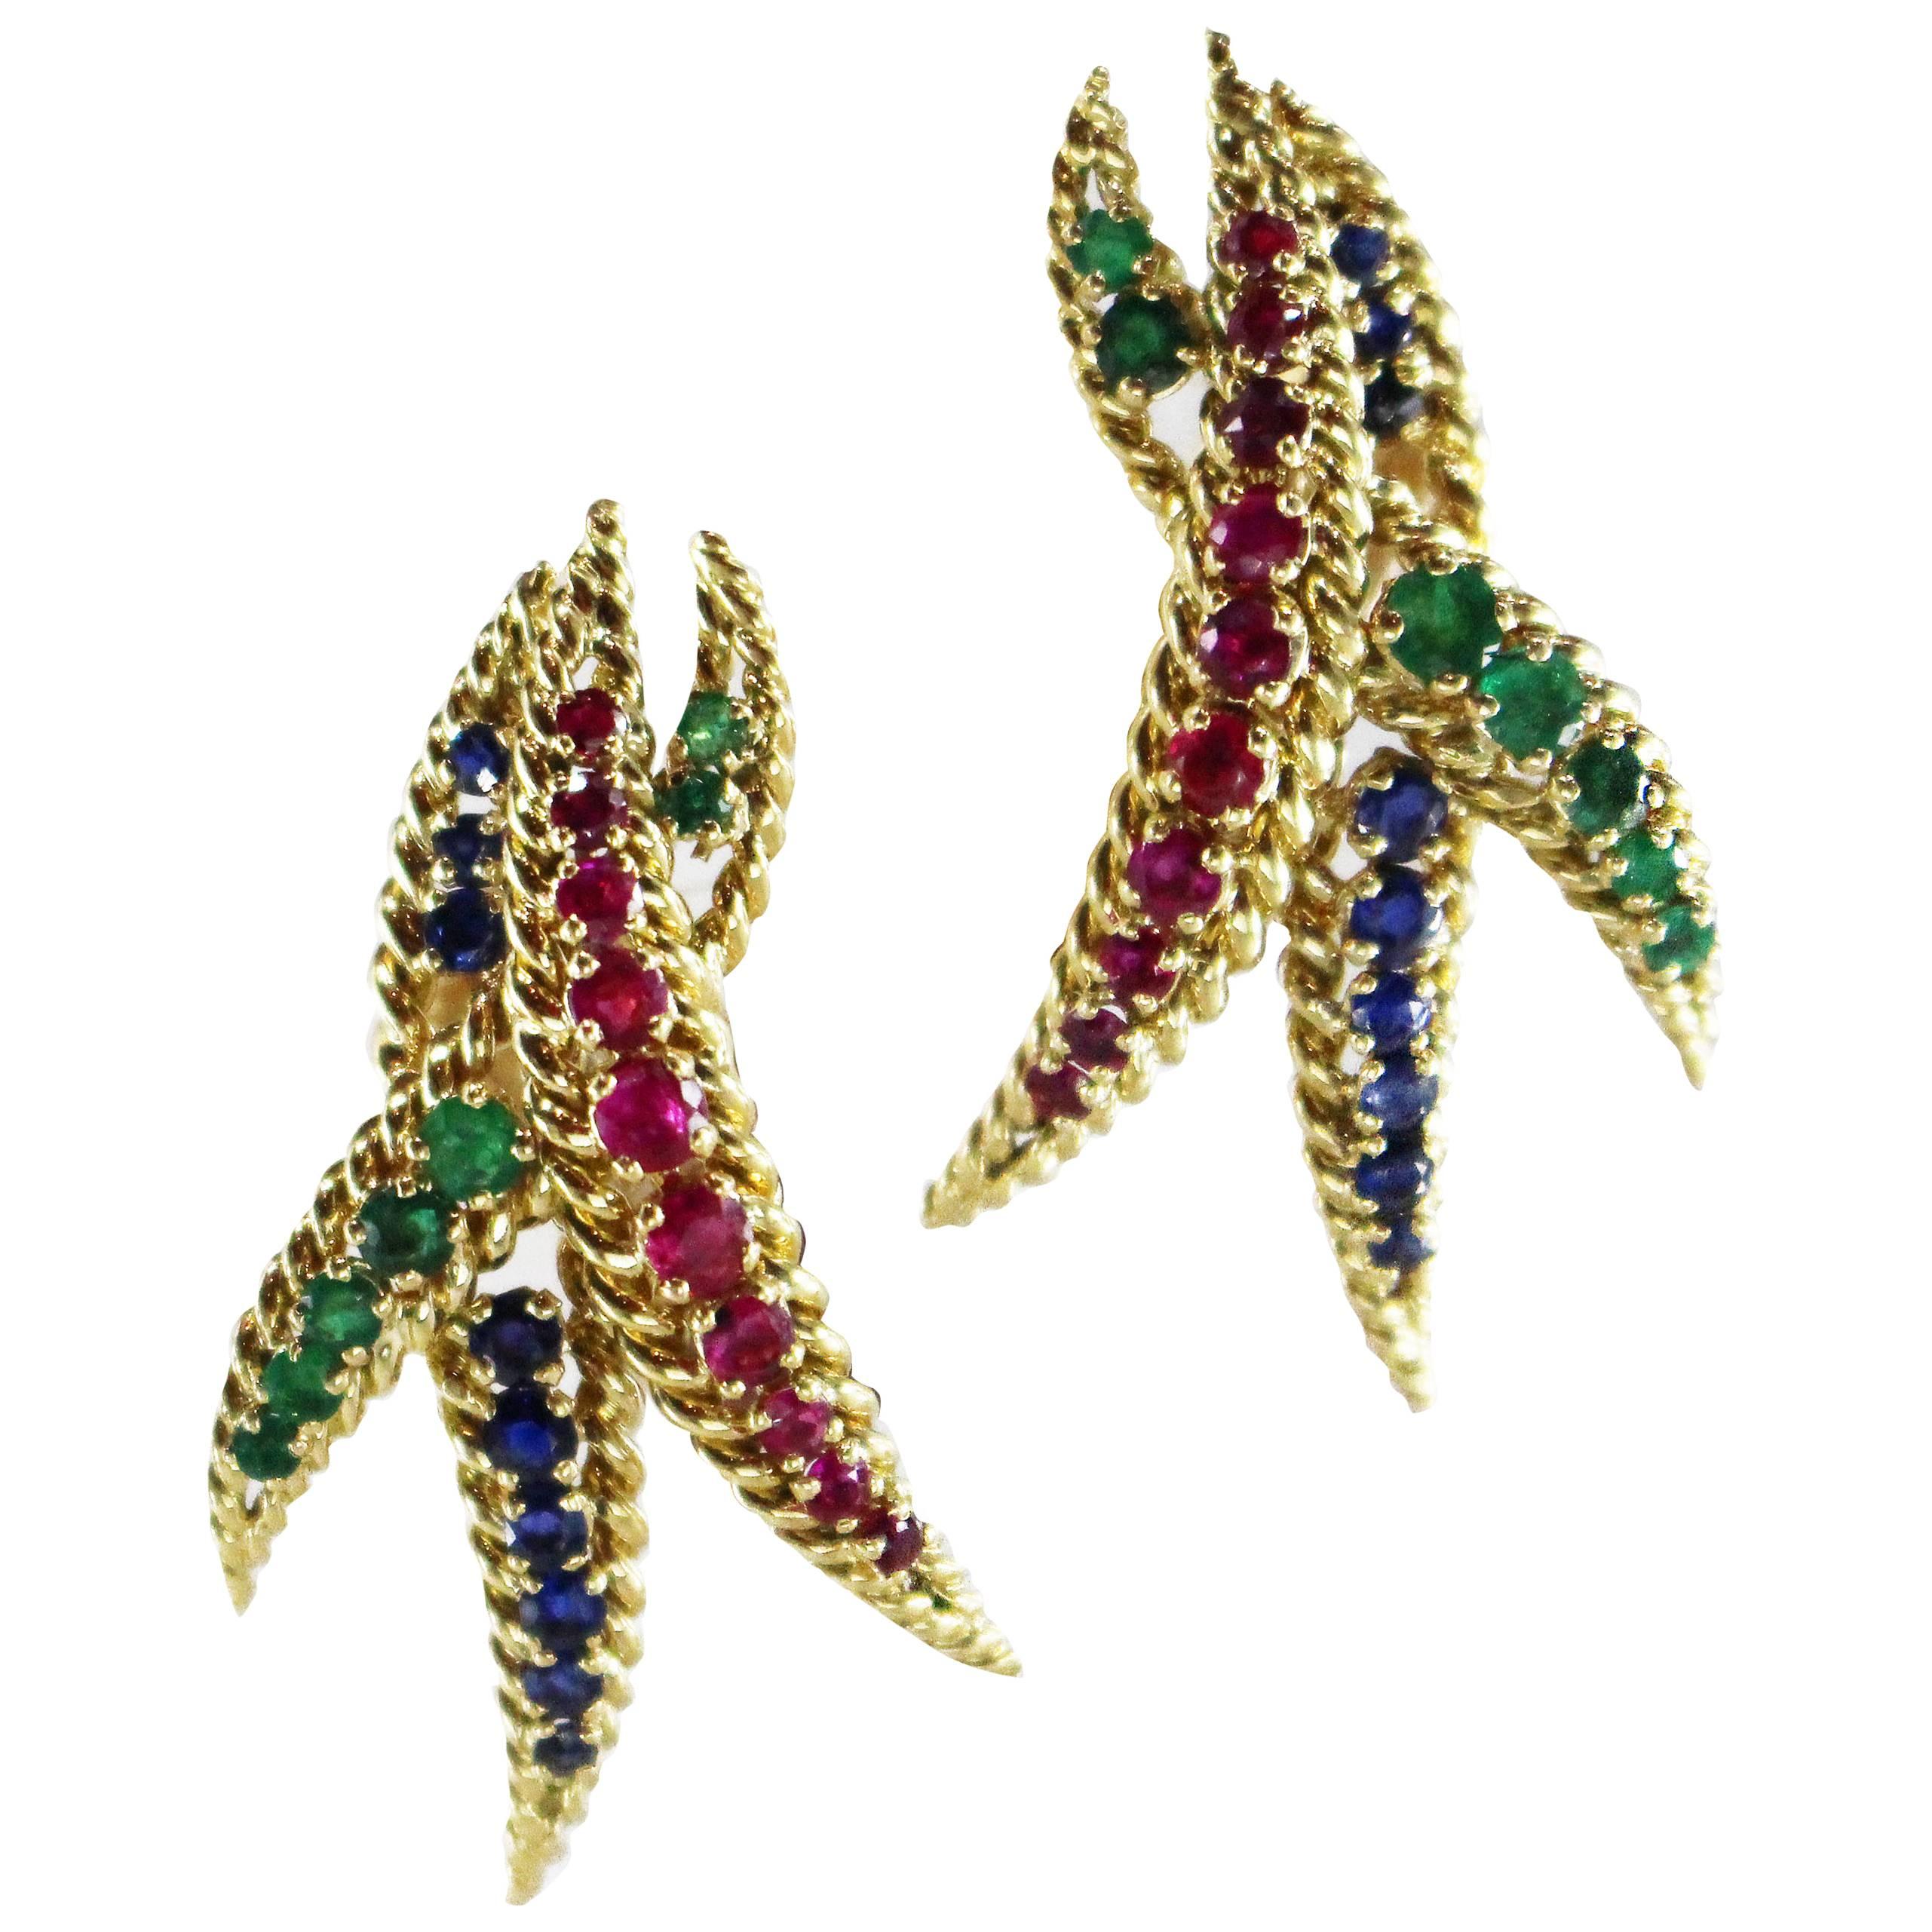 1980s Mauboussin Ruby, Sapphire and Emerald Ear Clips In Excellent Condition For Sale In Bay Harbor Islands, FL